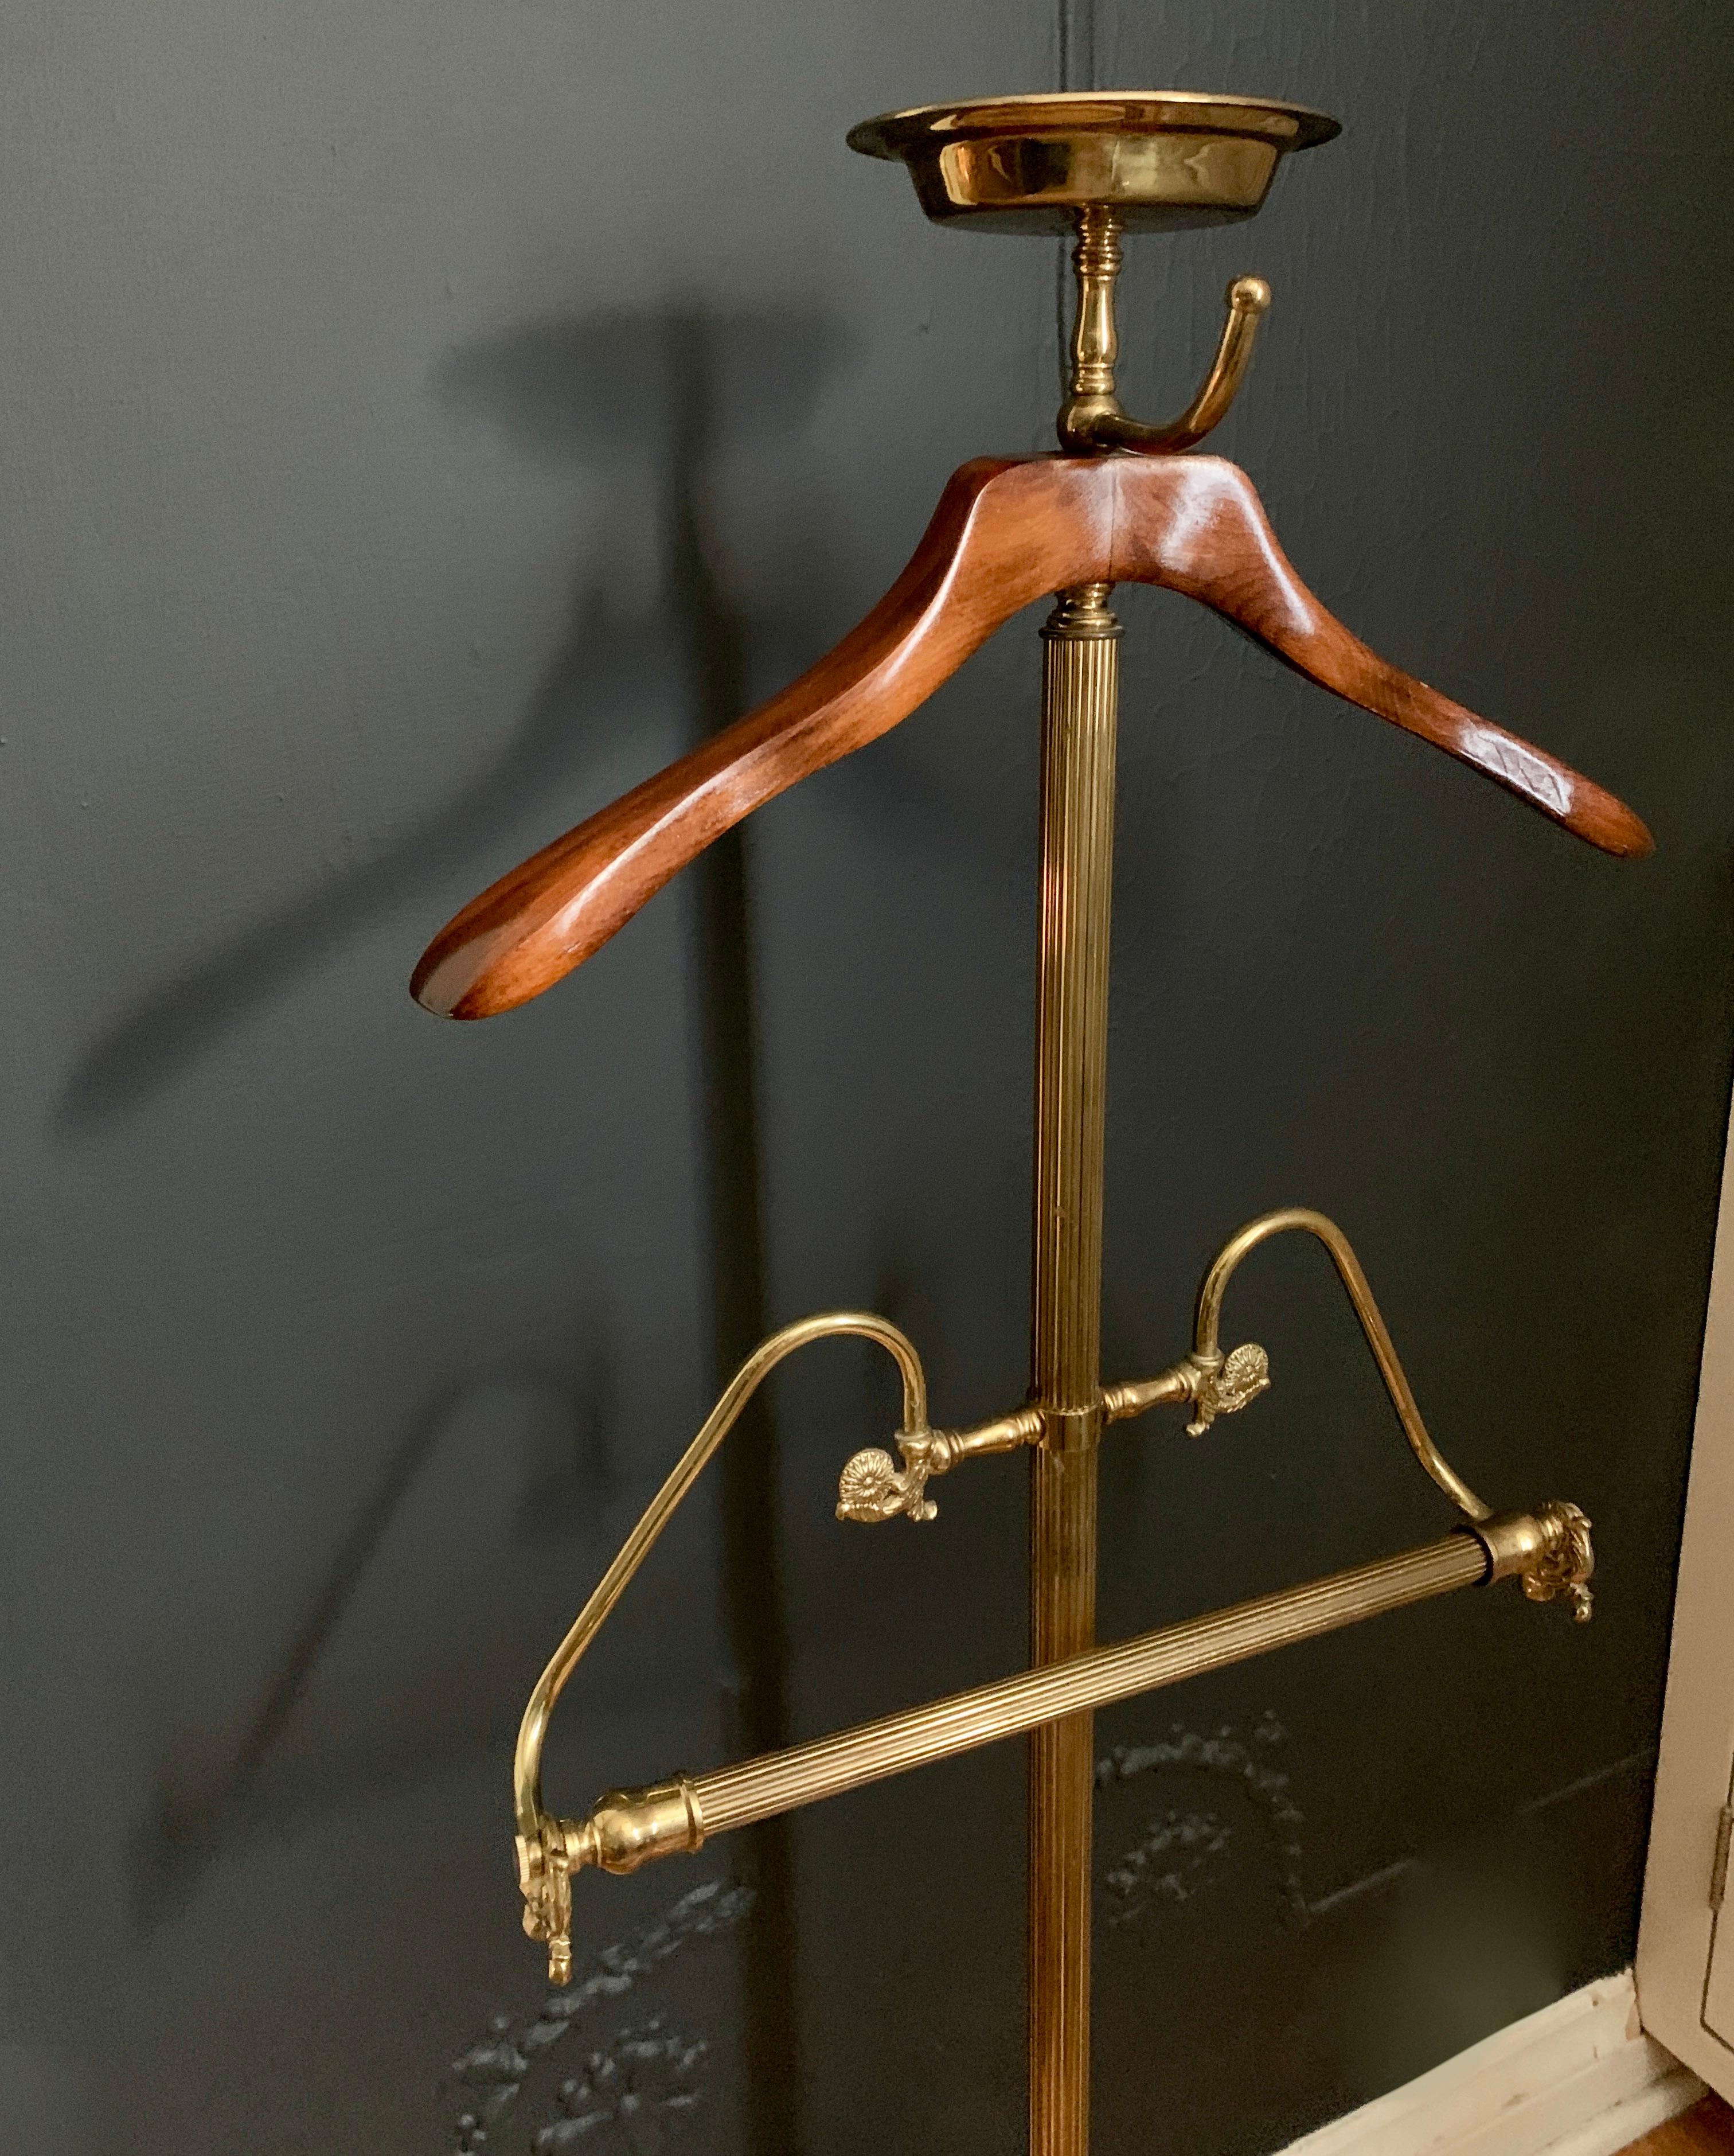 Brass and wood valet in the manner of Maison Jansen - a wonderful valet for the bedroom, dressing room or closet. Details on the brass and the polished wood are in very good condition and very sophisticated. The base has bit of patina and overall a